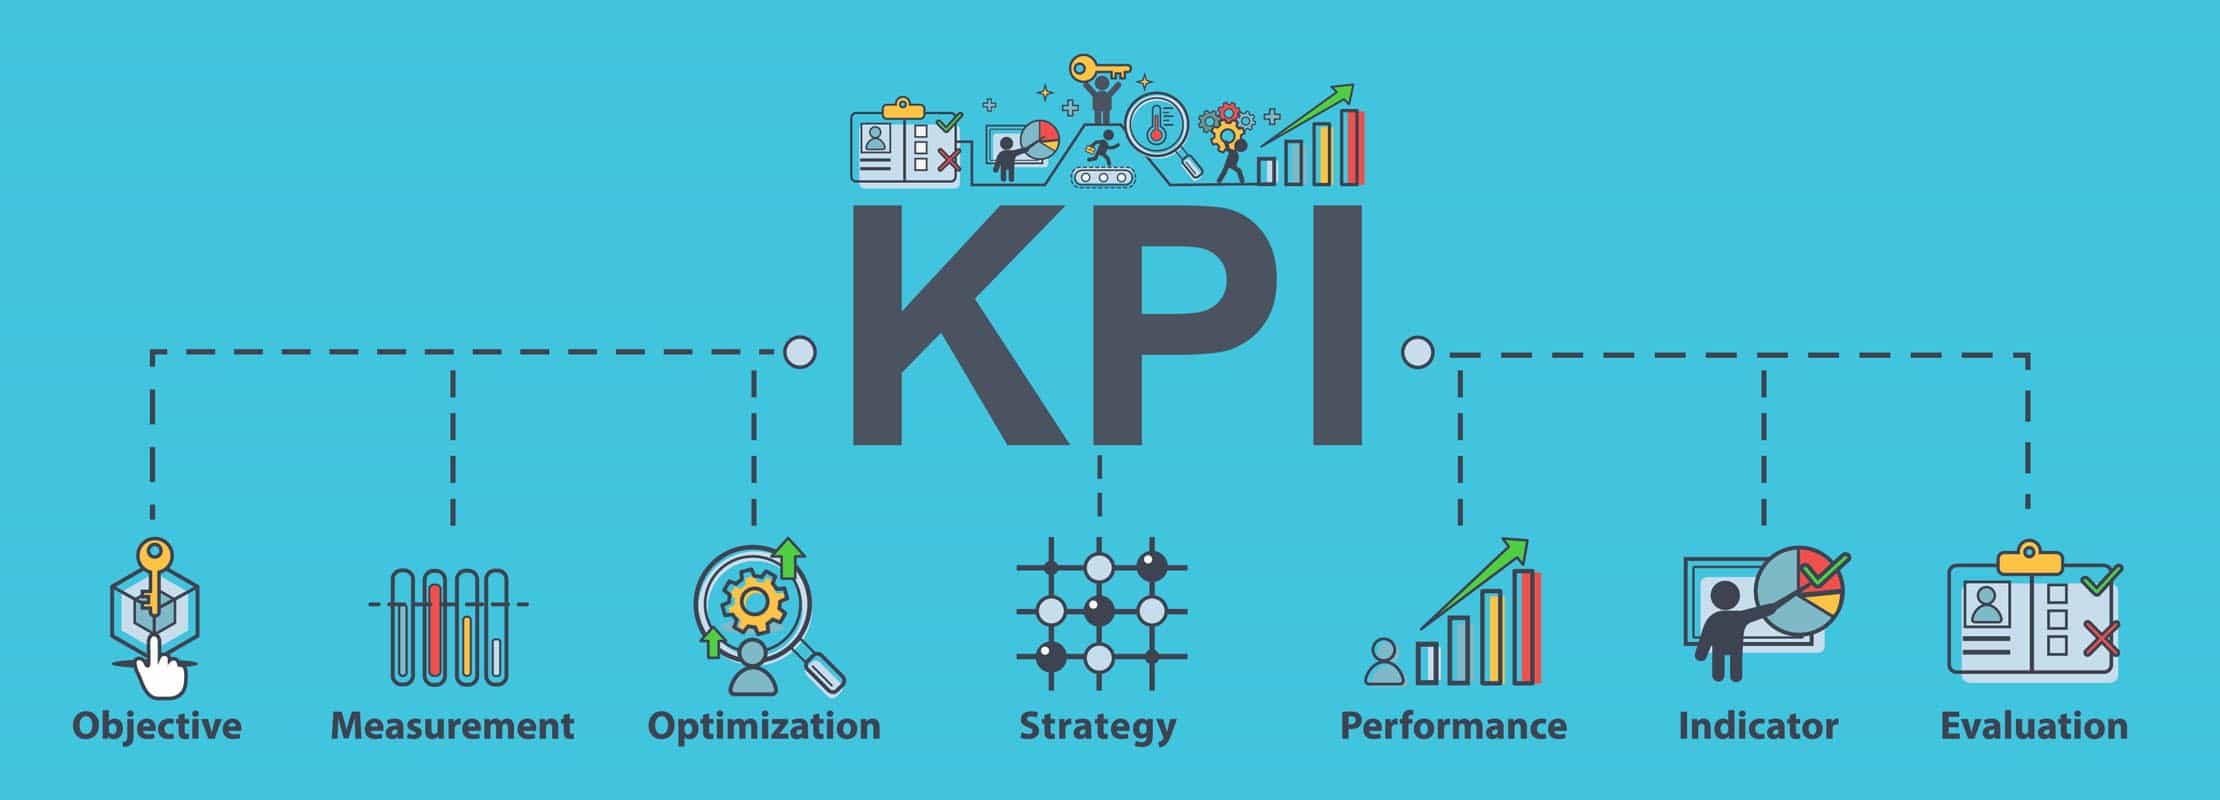 objective,mesaurement,optimization,strategy,perfomance,indicator and evaluation with logo pointing to KPI for digital marketing|web design company in kerala 